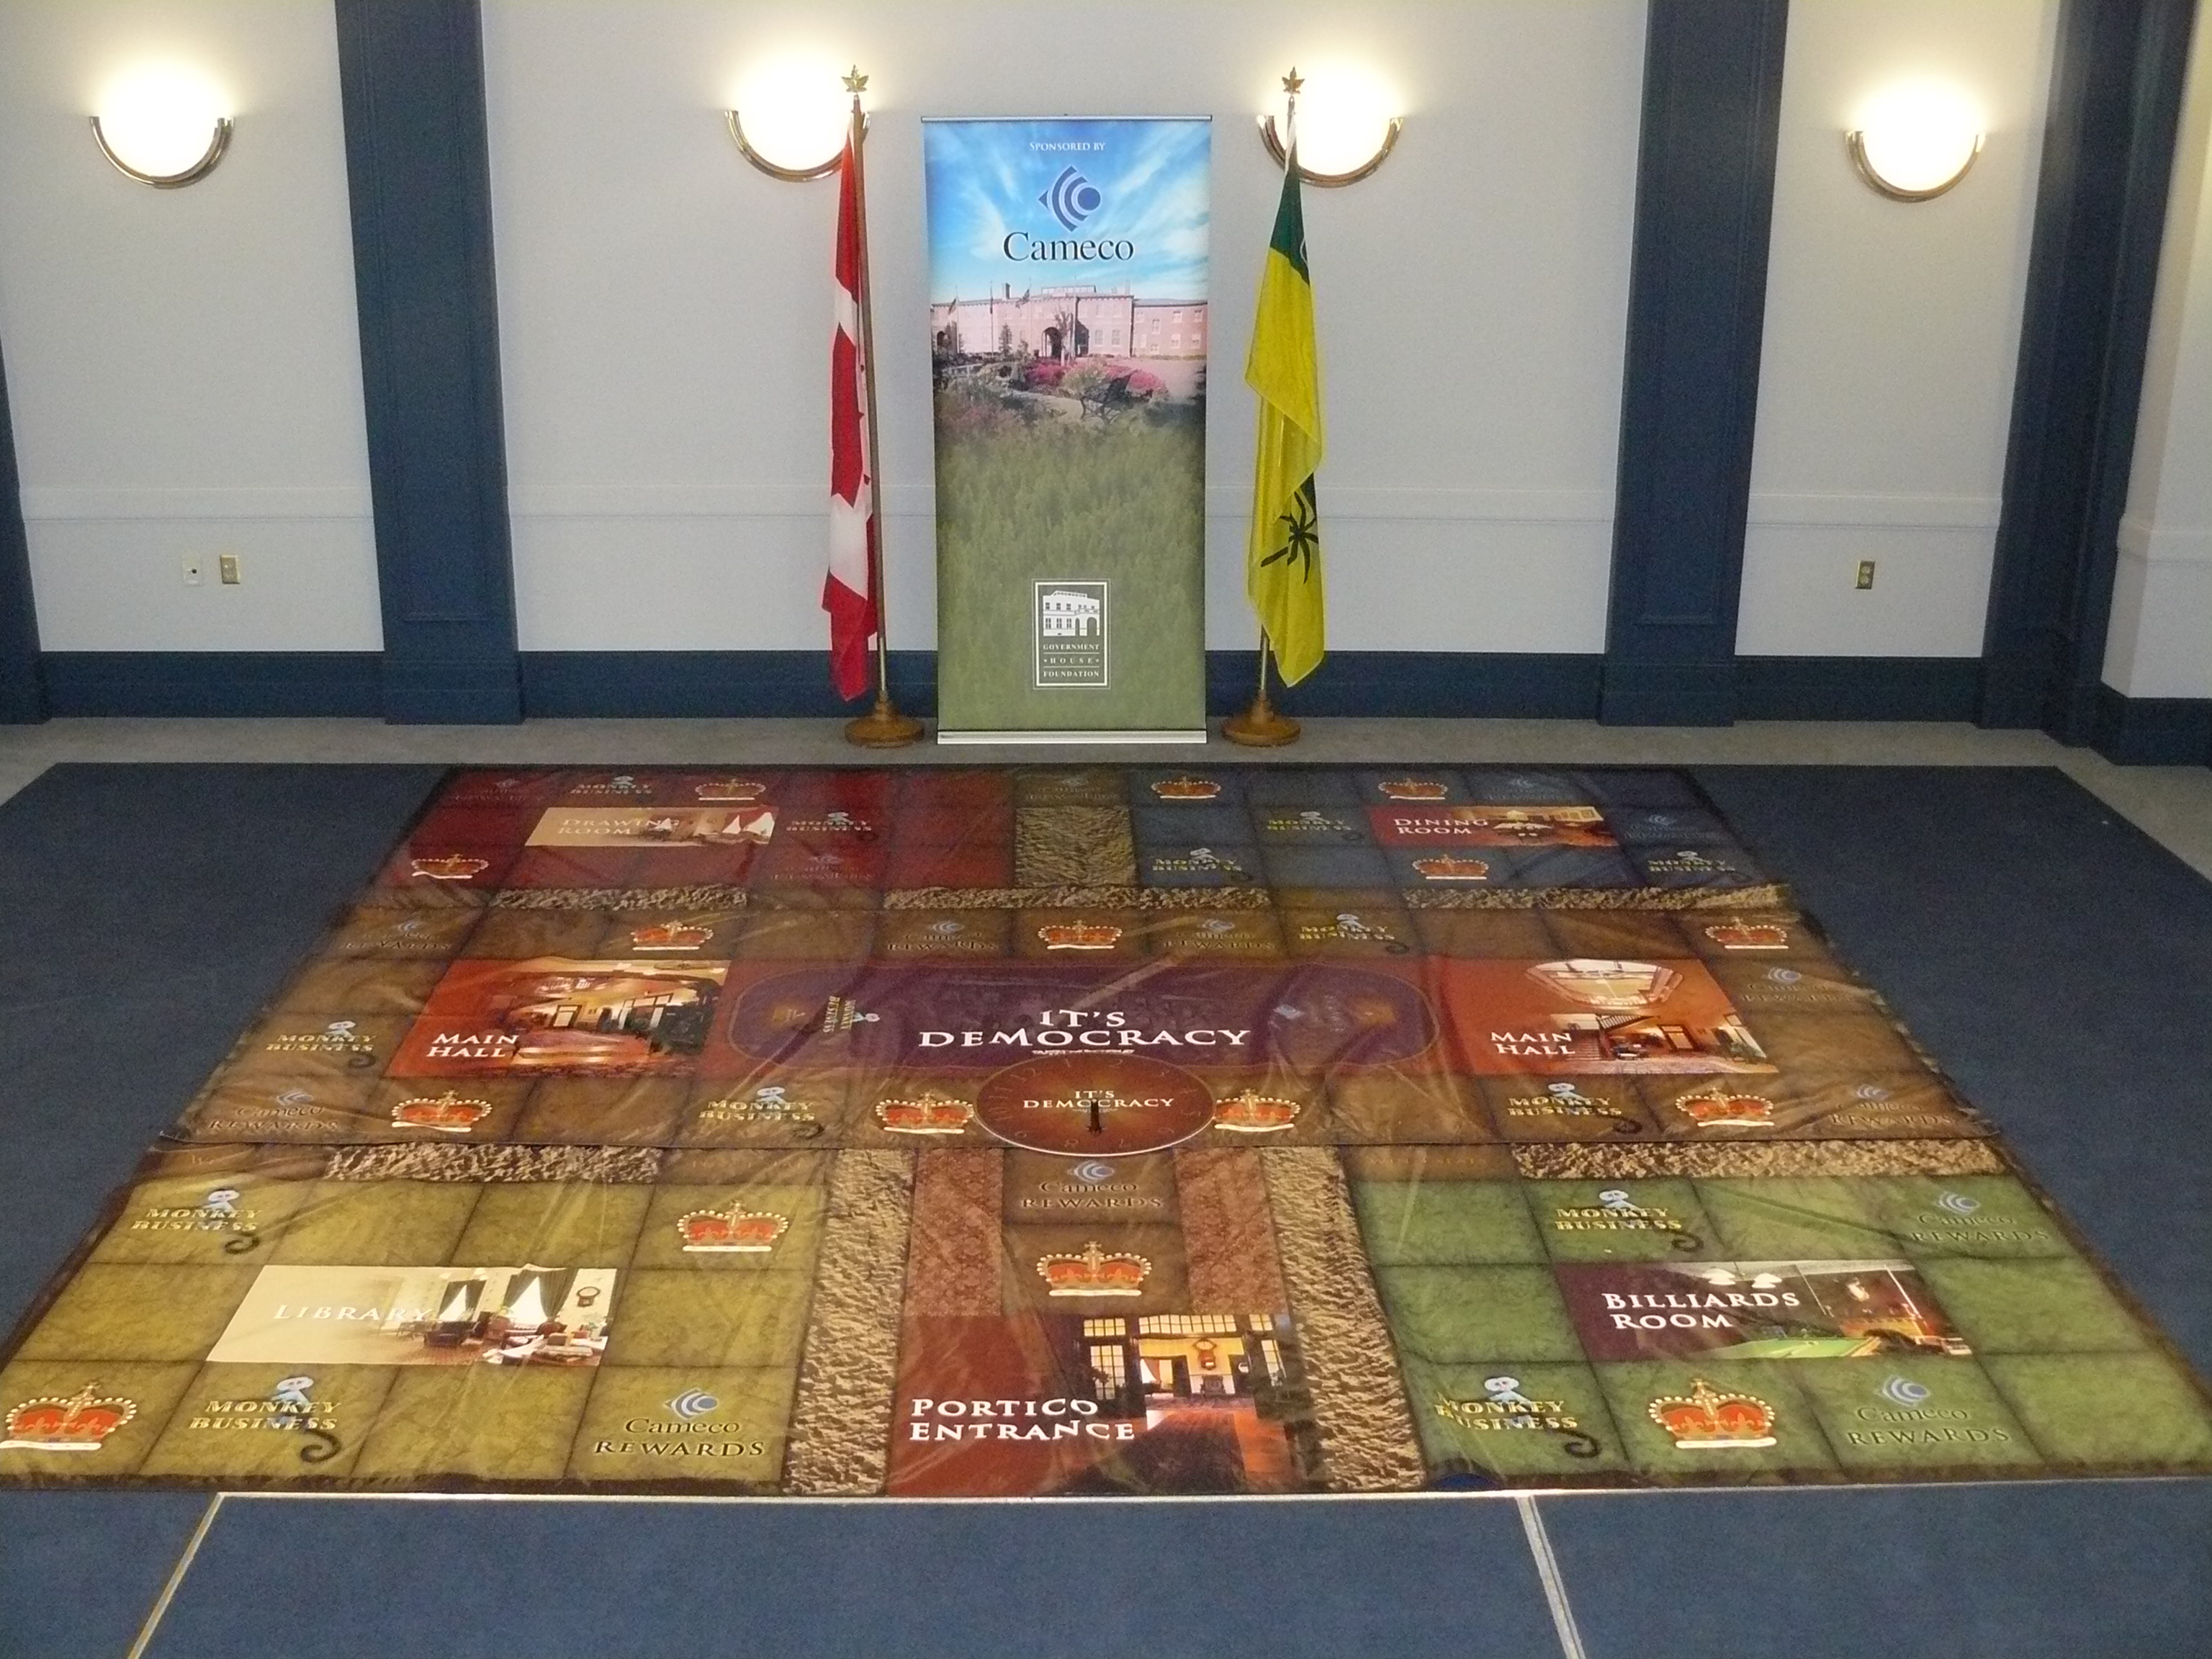 A giant board game on the floor of a room.